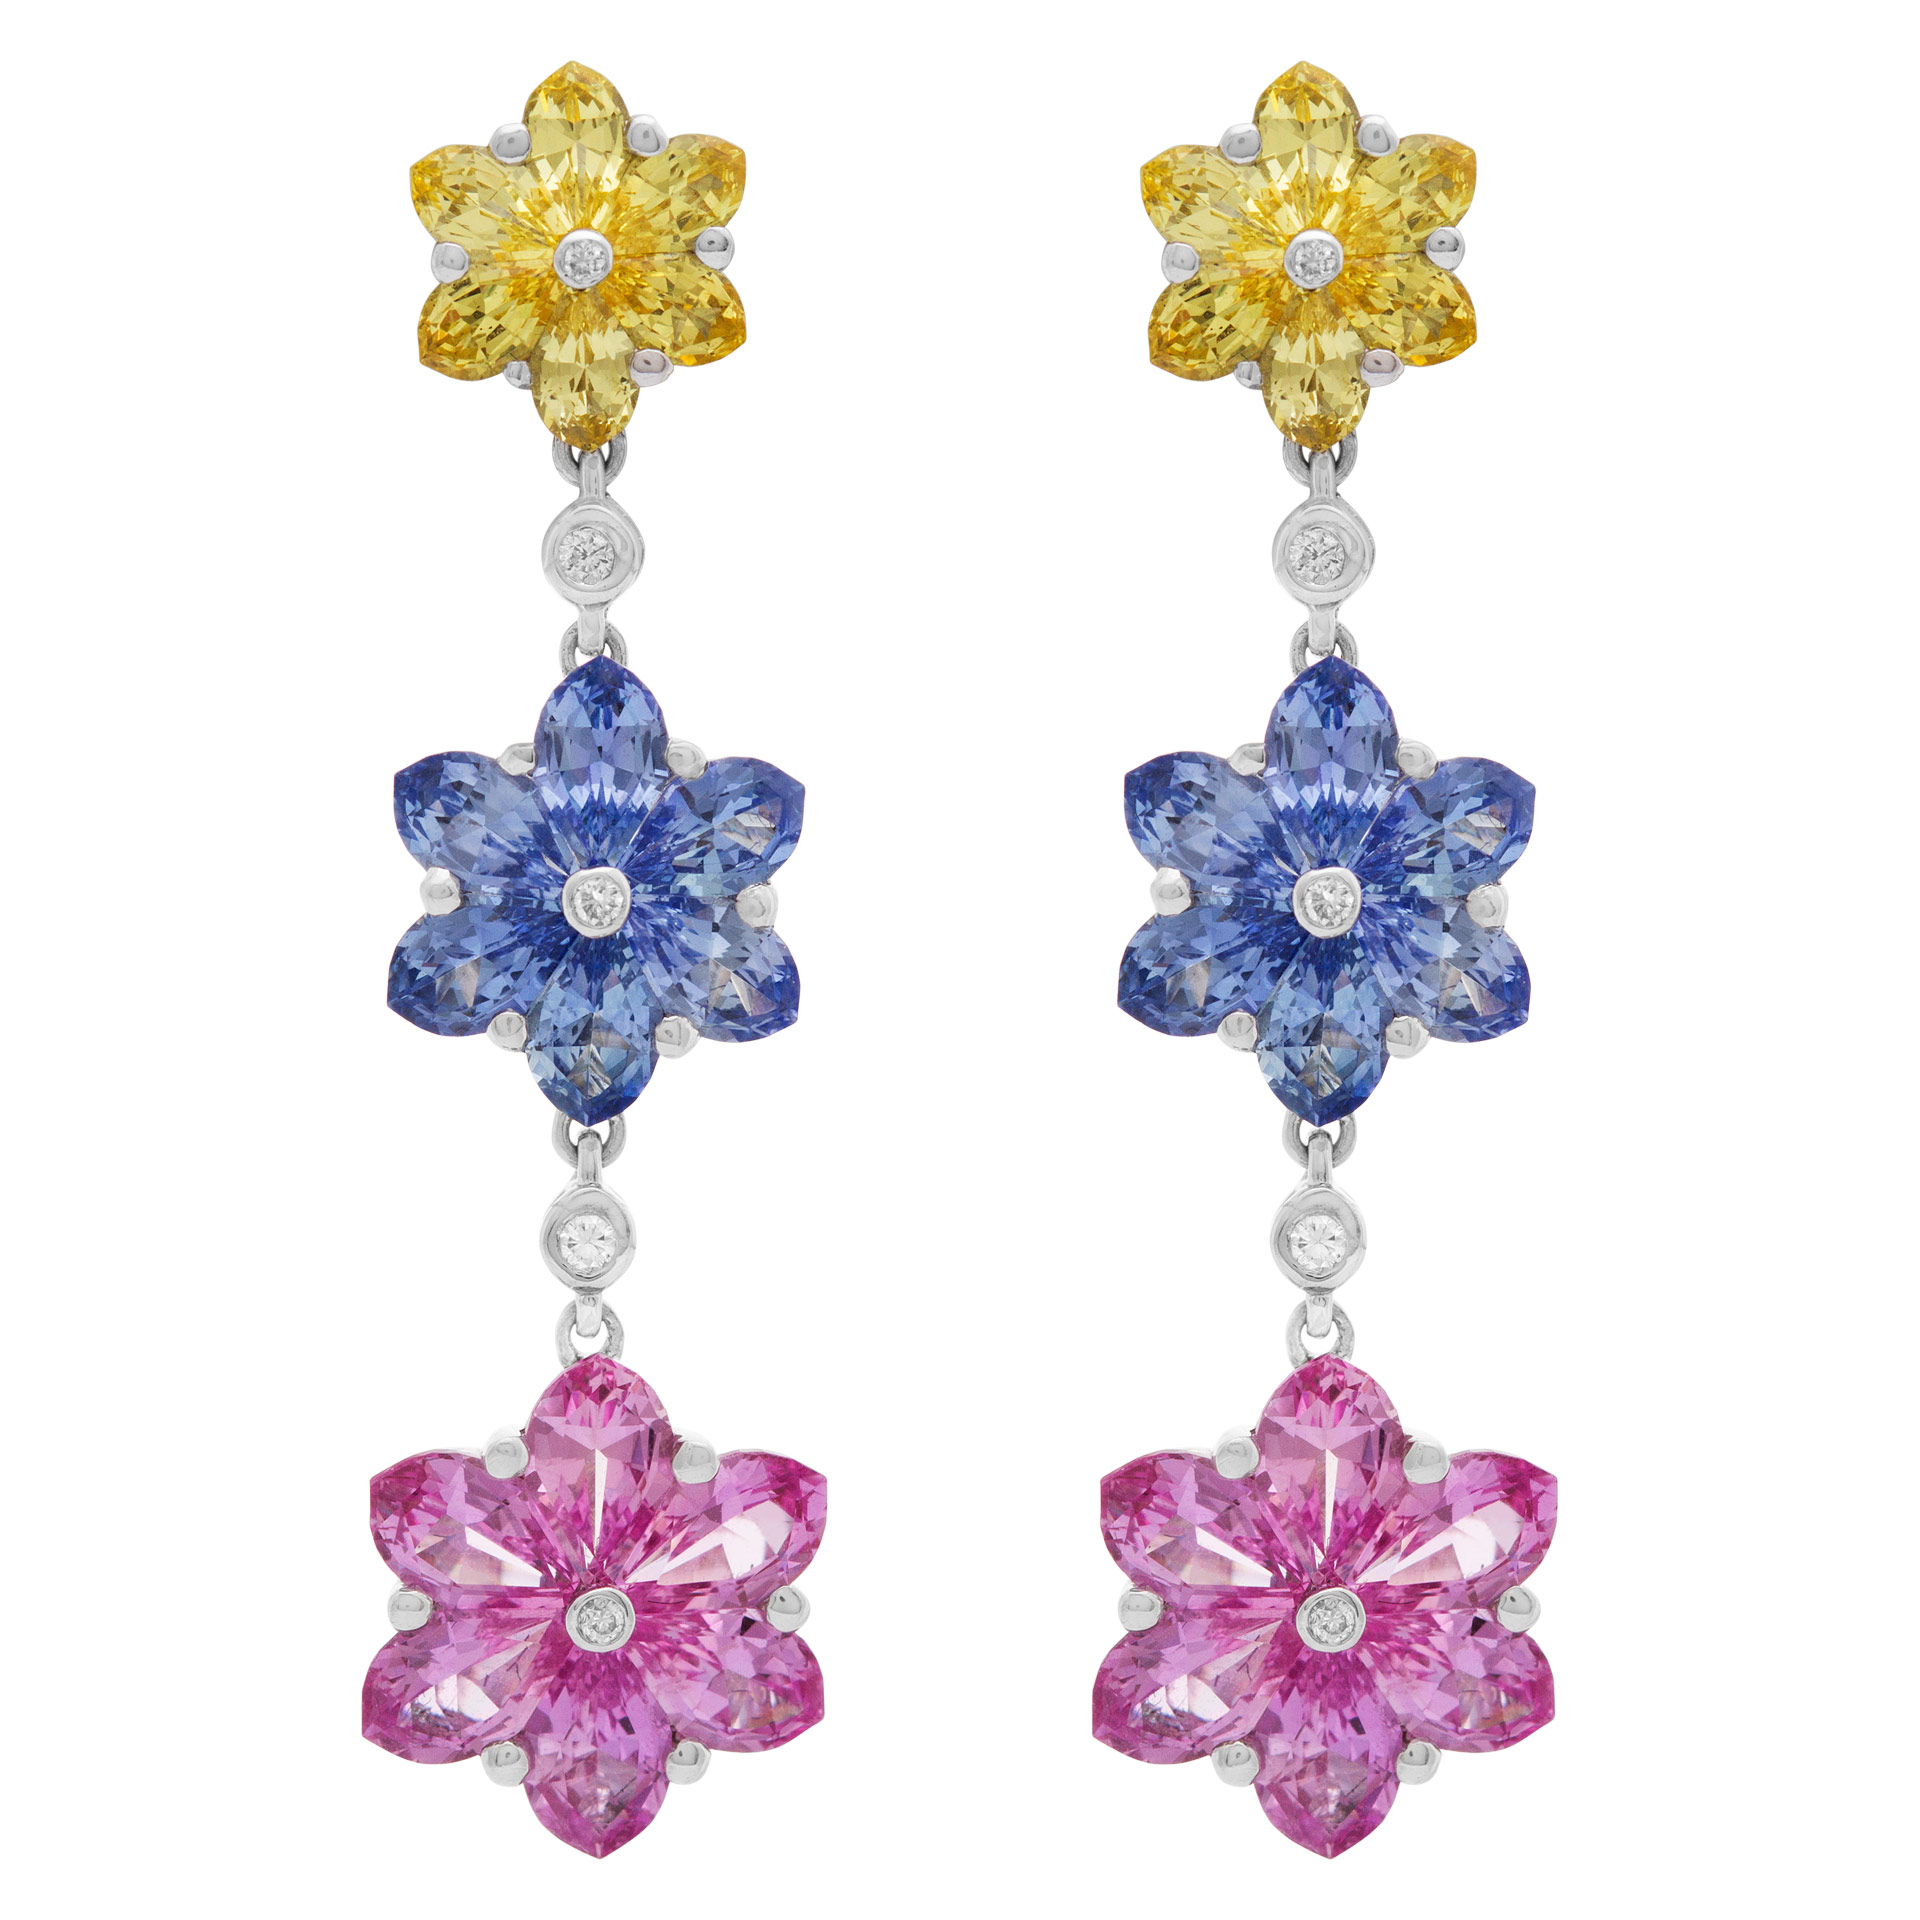 Flower drop earrings in 18k white gold with diamond and sapphires